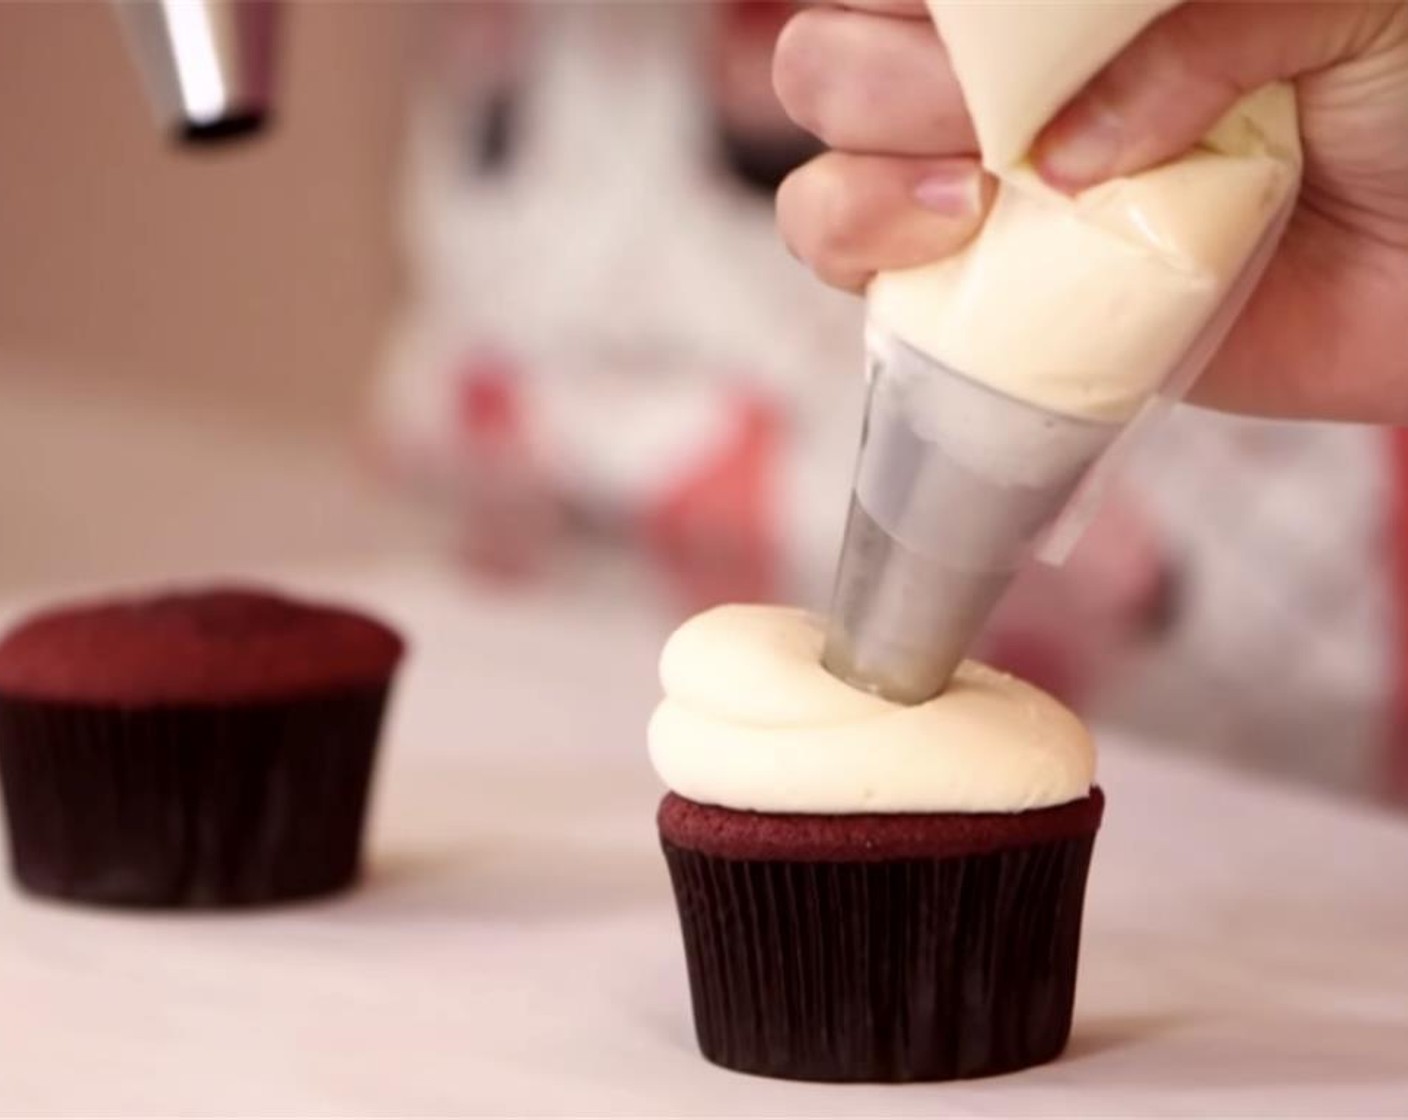 step 15 Transfer frosting into a plastic piping bag fitted with a round metal tip. Make sure cupcakes are completely cooled before piping the frosting on each cupcake.